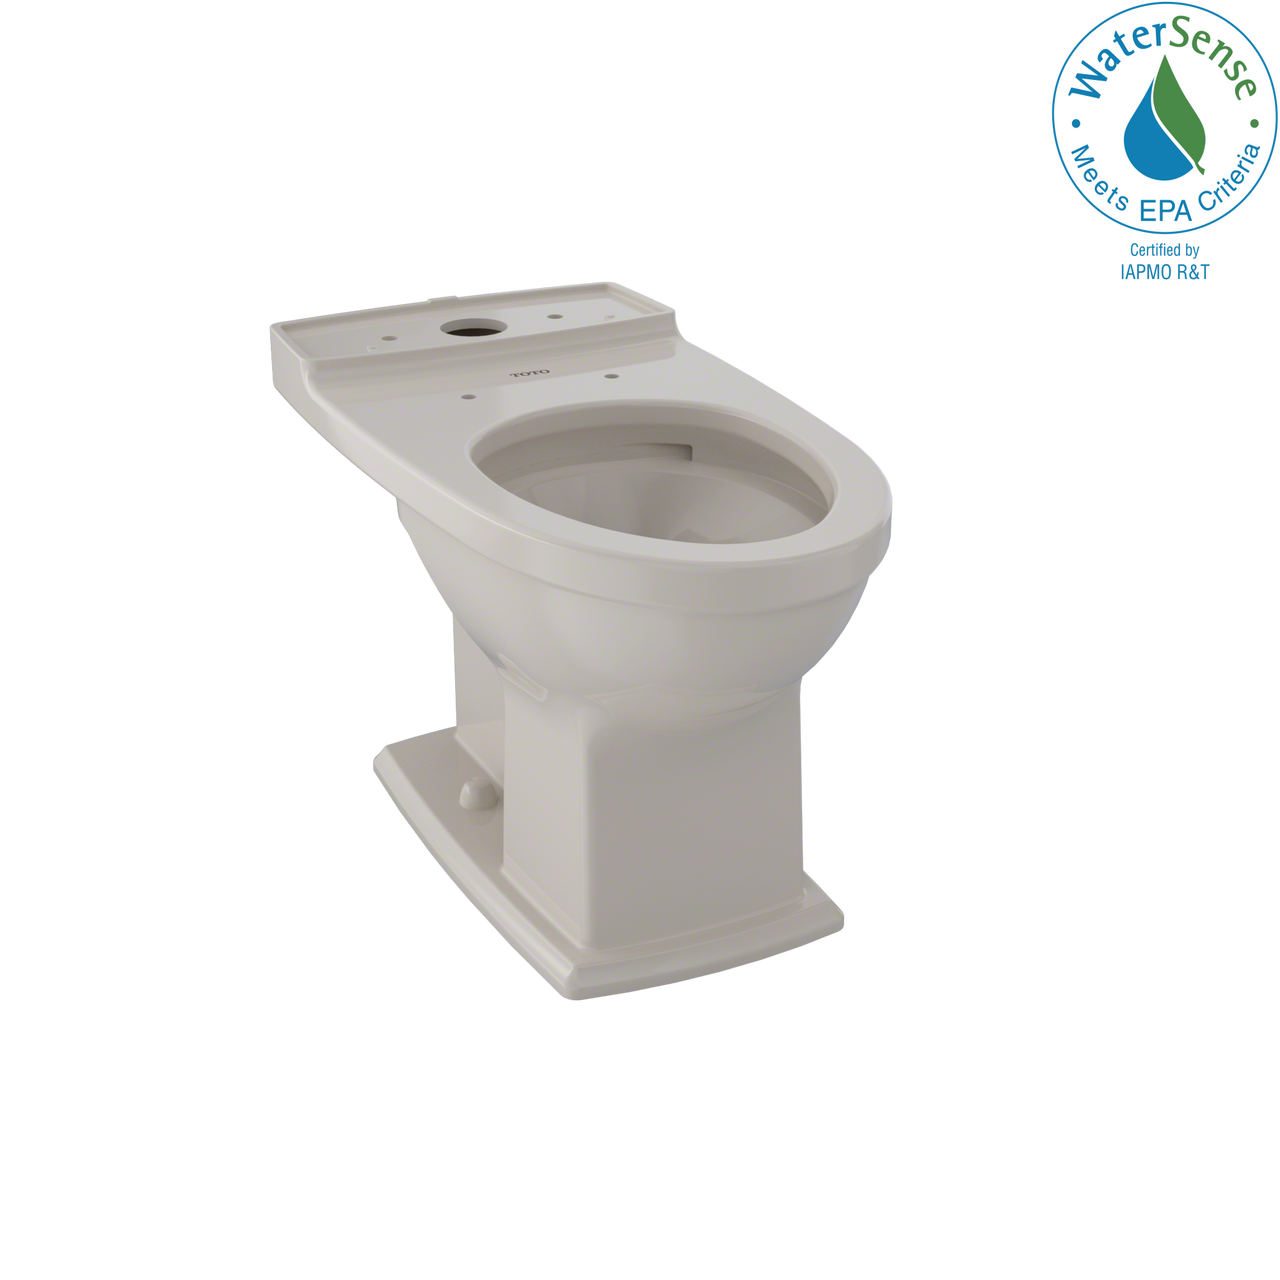 TOTO Connelly Universal Height Elongated Toilet Bowl with CeFiONtect,  - CT494CEFG#03 - BNGBath